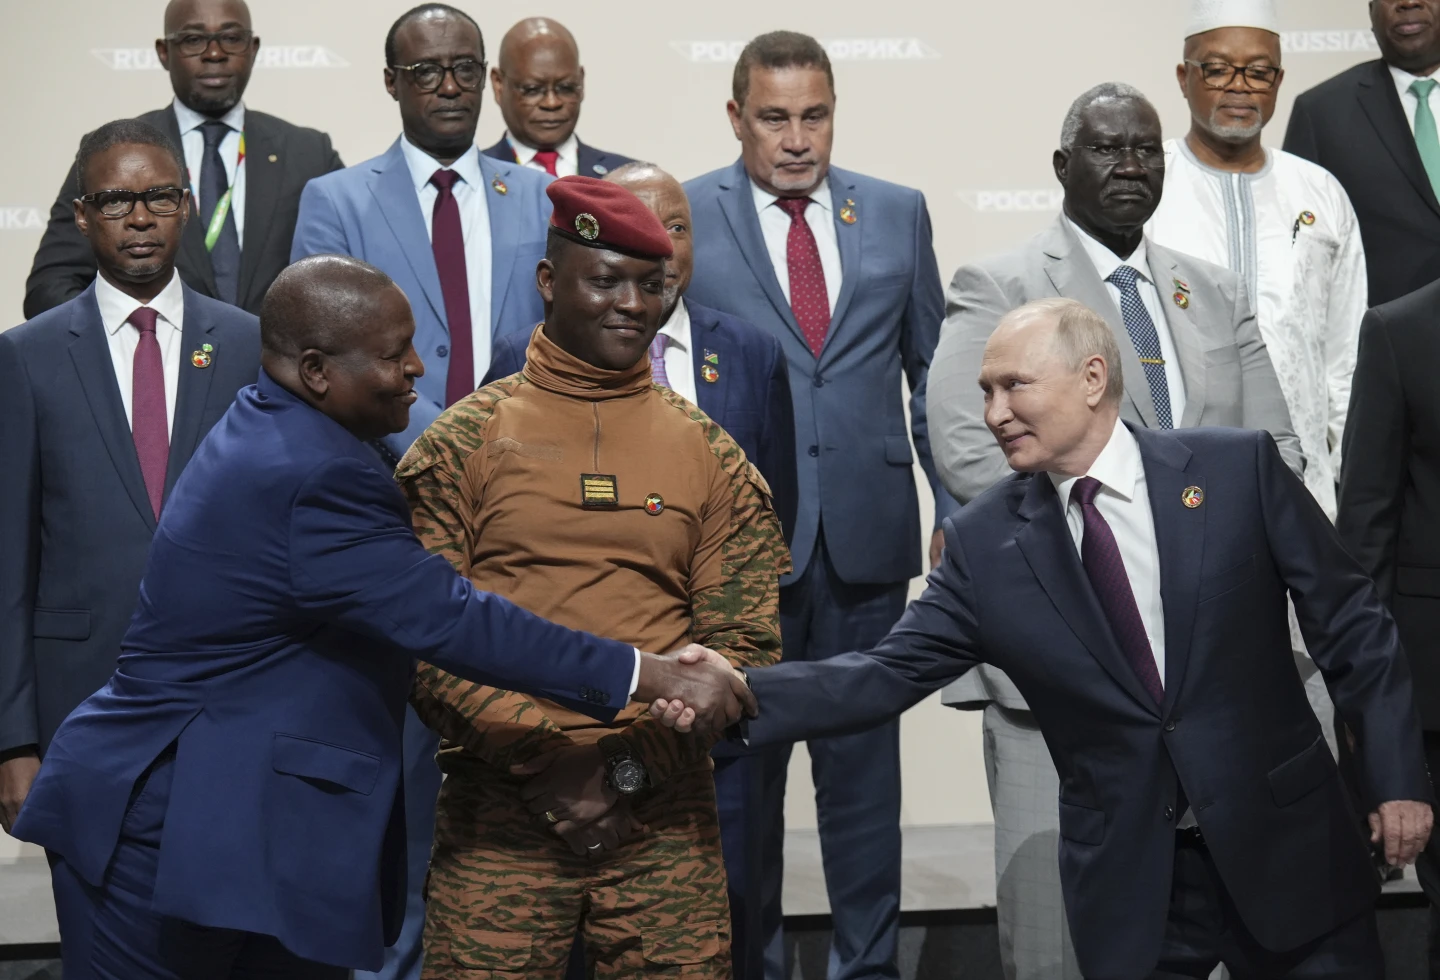 Putin Woos African Leaders at a Summit in Russia with Promises of Expanding Trade and Other Ties